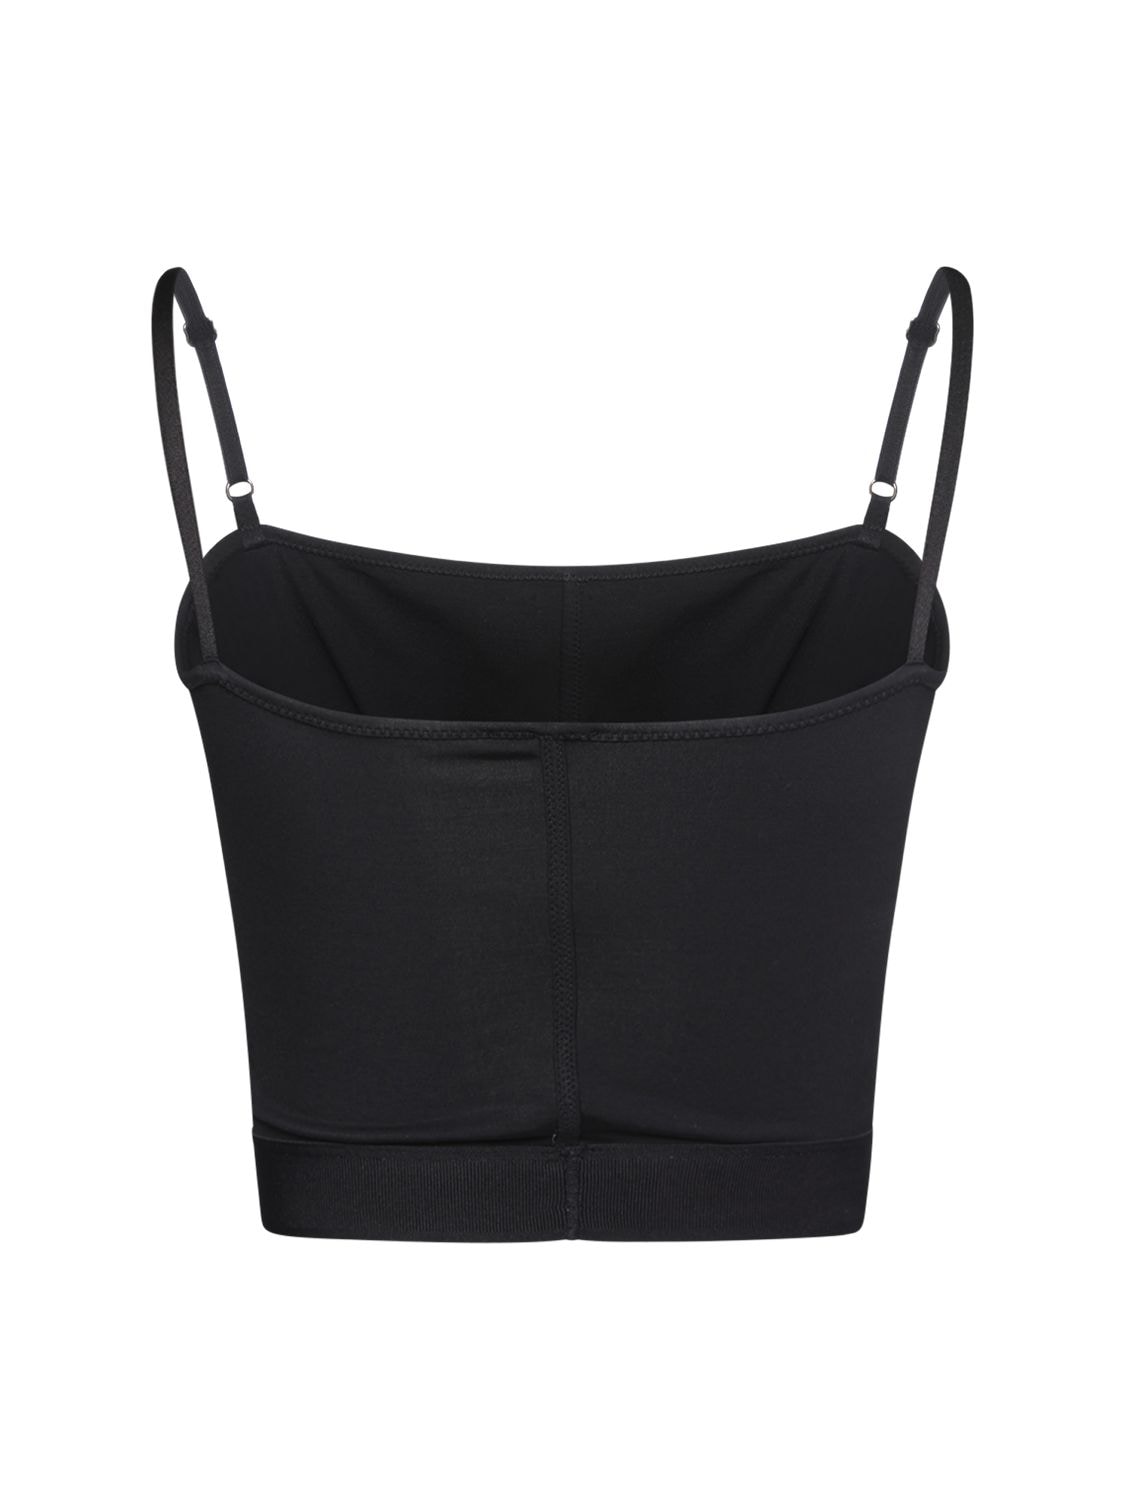 Shop Tom Ford Cropped Tech Tank Top In Black